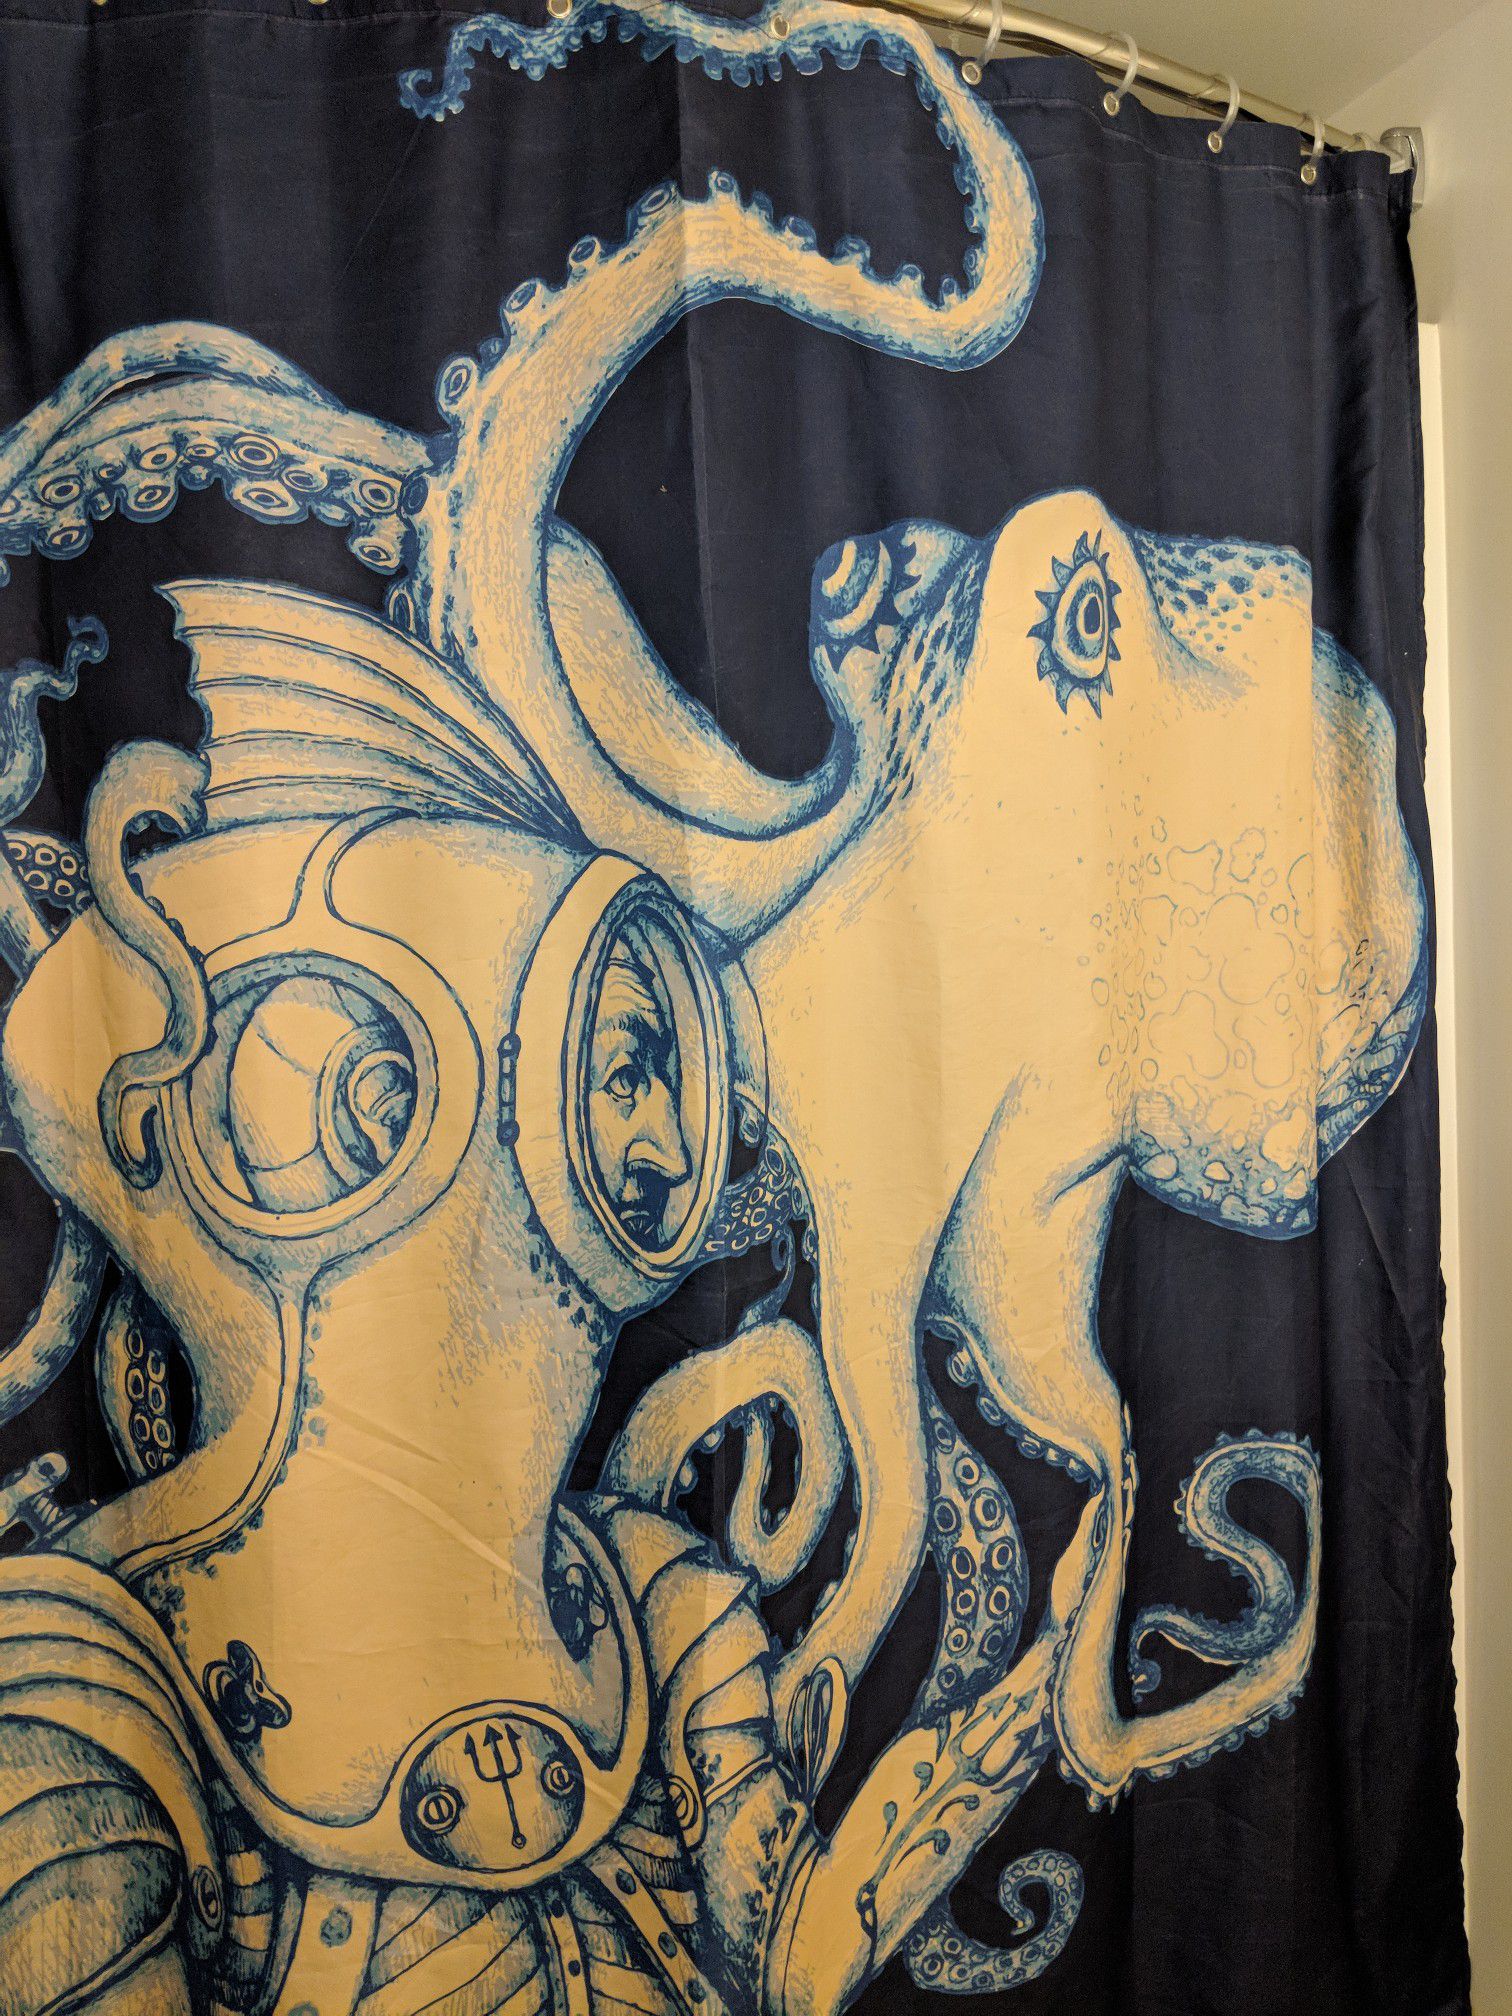 Society6 Octopus Shower Curtain Set Nautical Bathroom Decor Kraken and Scuba Diver Gold Tentacles Blue Polyester Fabric clear plasti hooks included